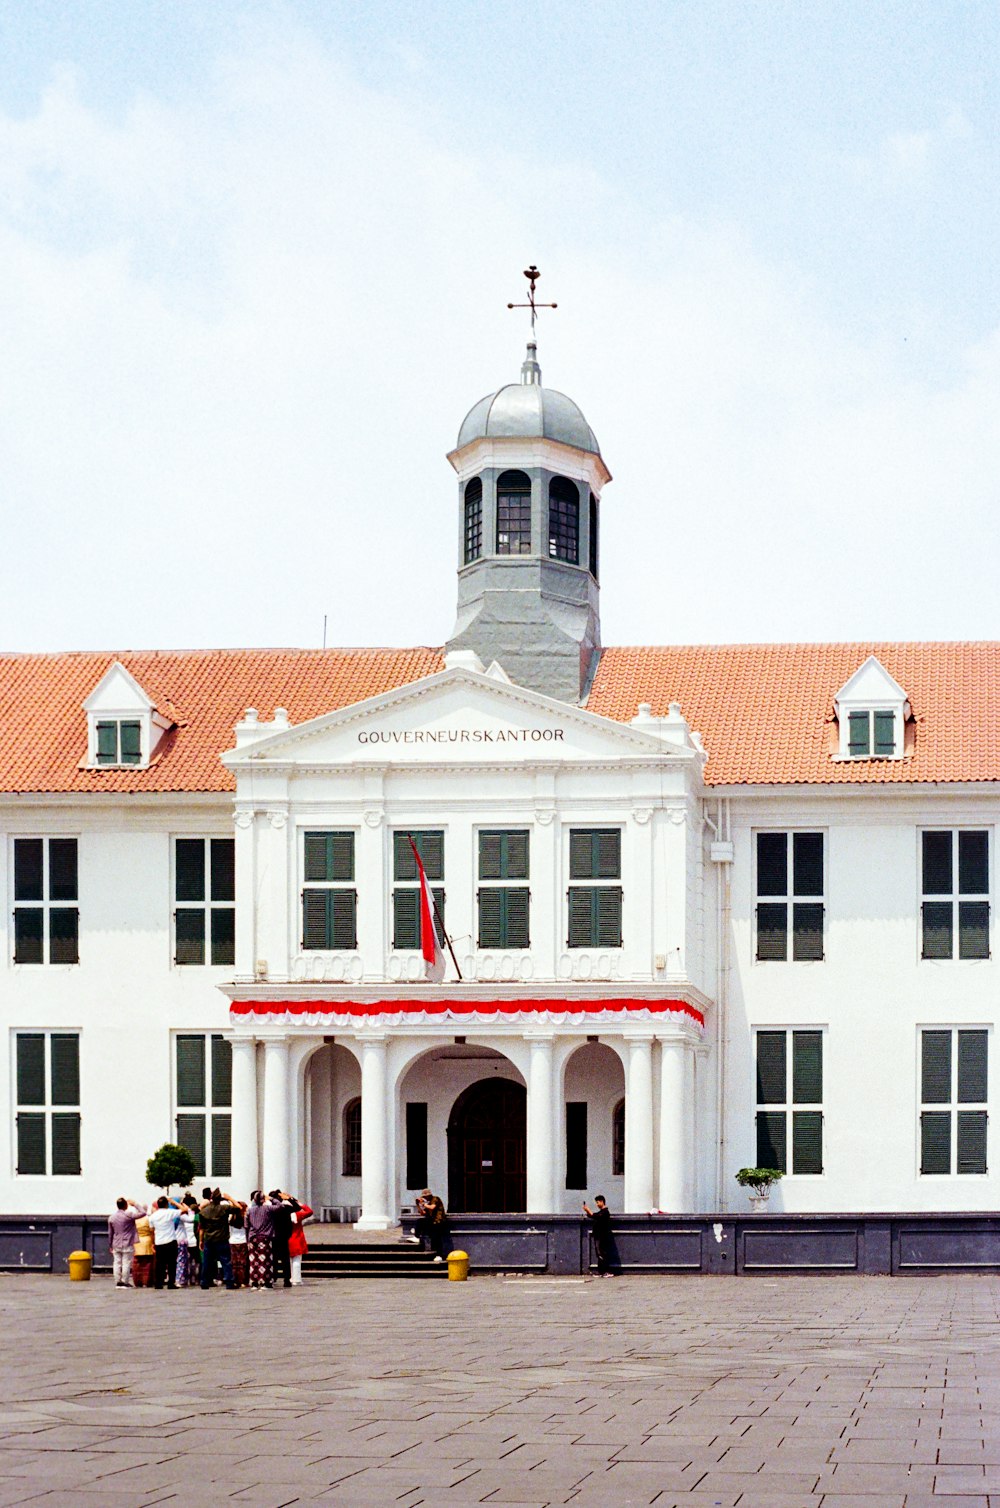 a large white building with a clock tower